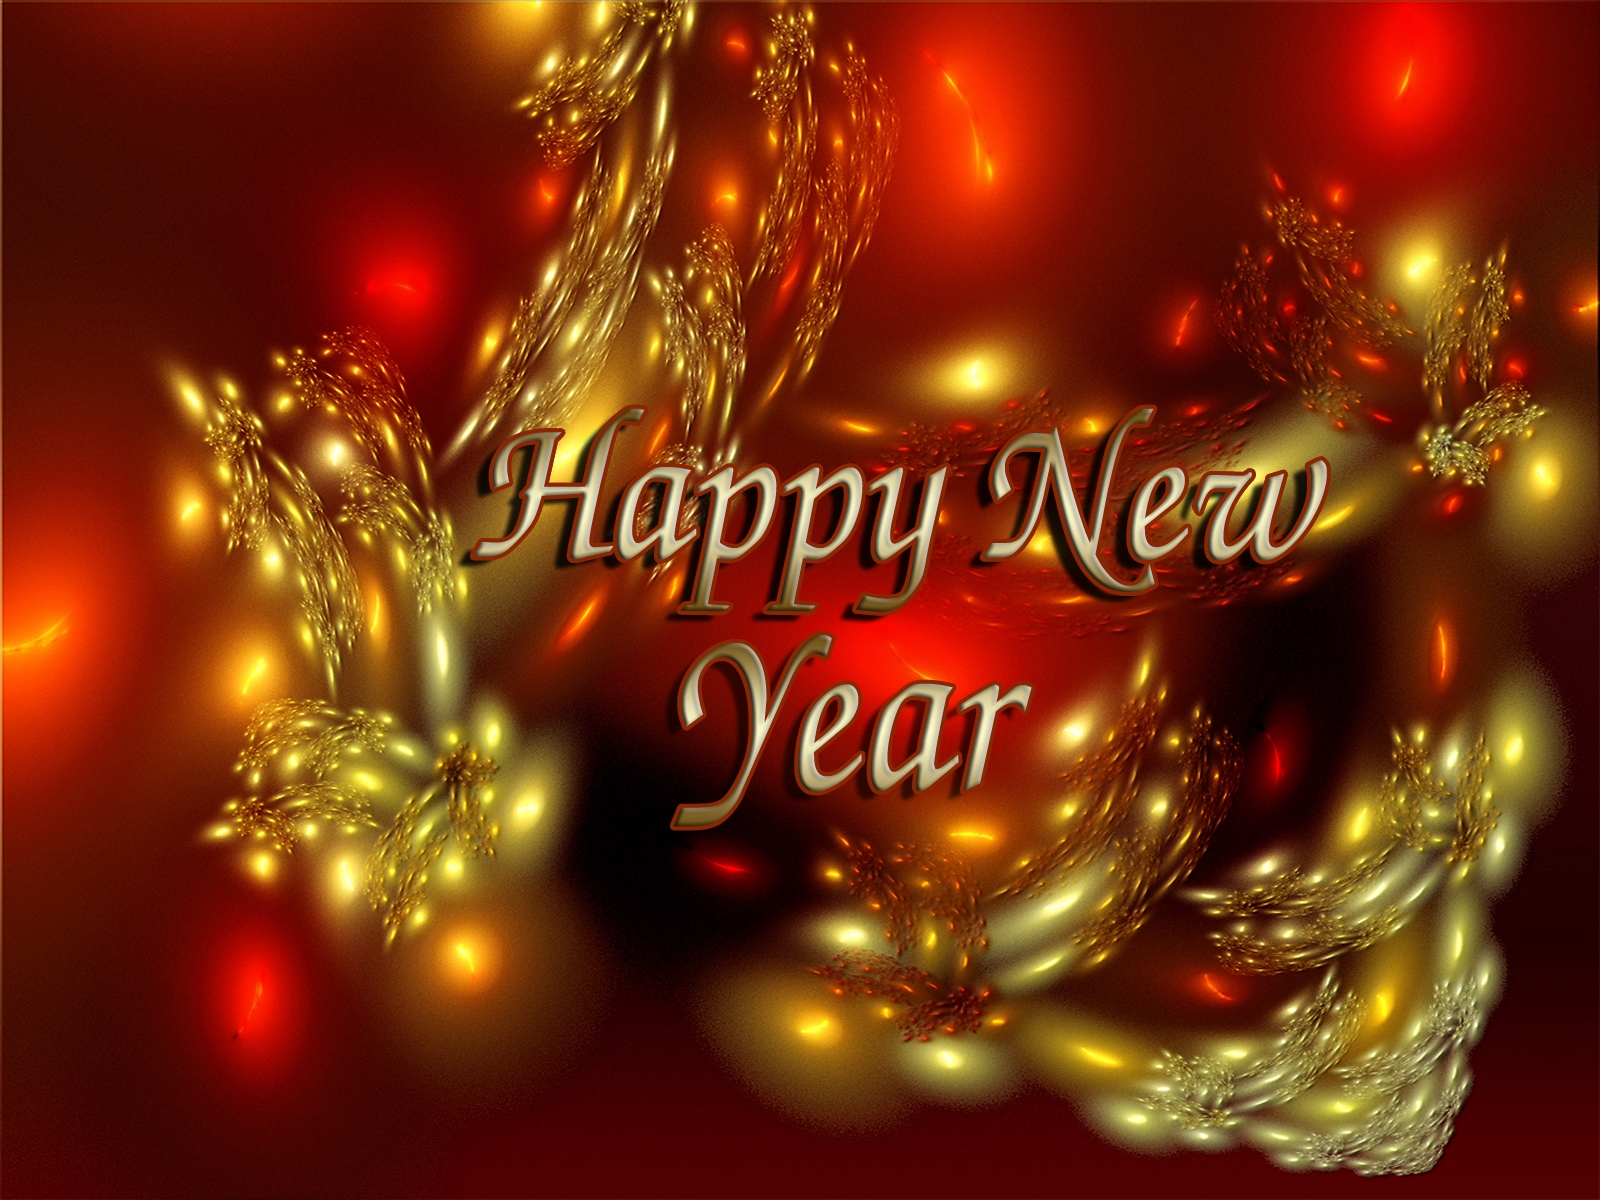 most-beautiful-happy-new-year-wishes-greetings-cards-wallpapers-2013-011